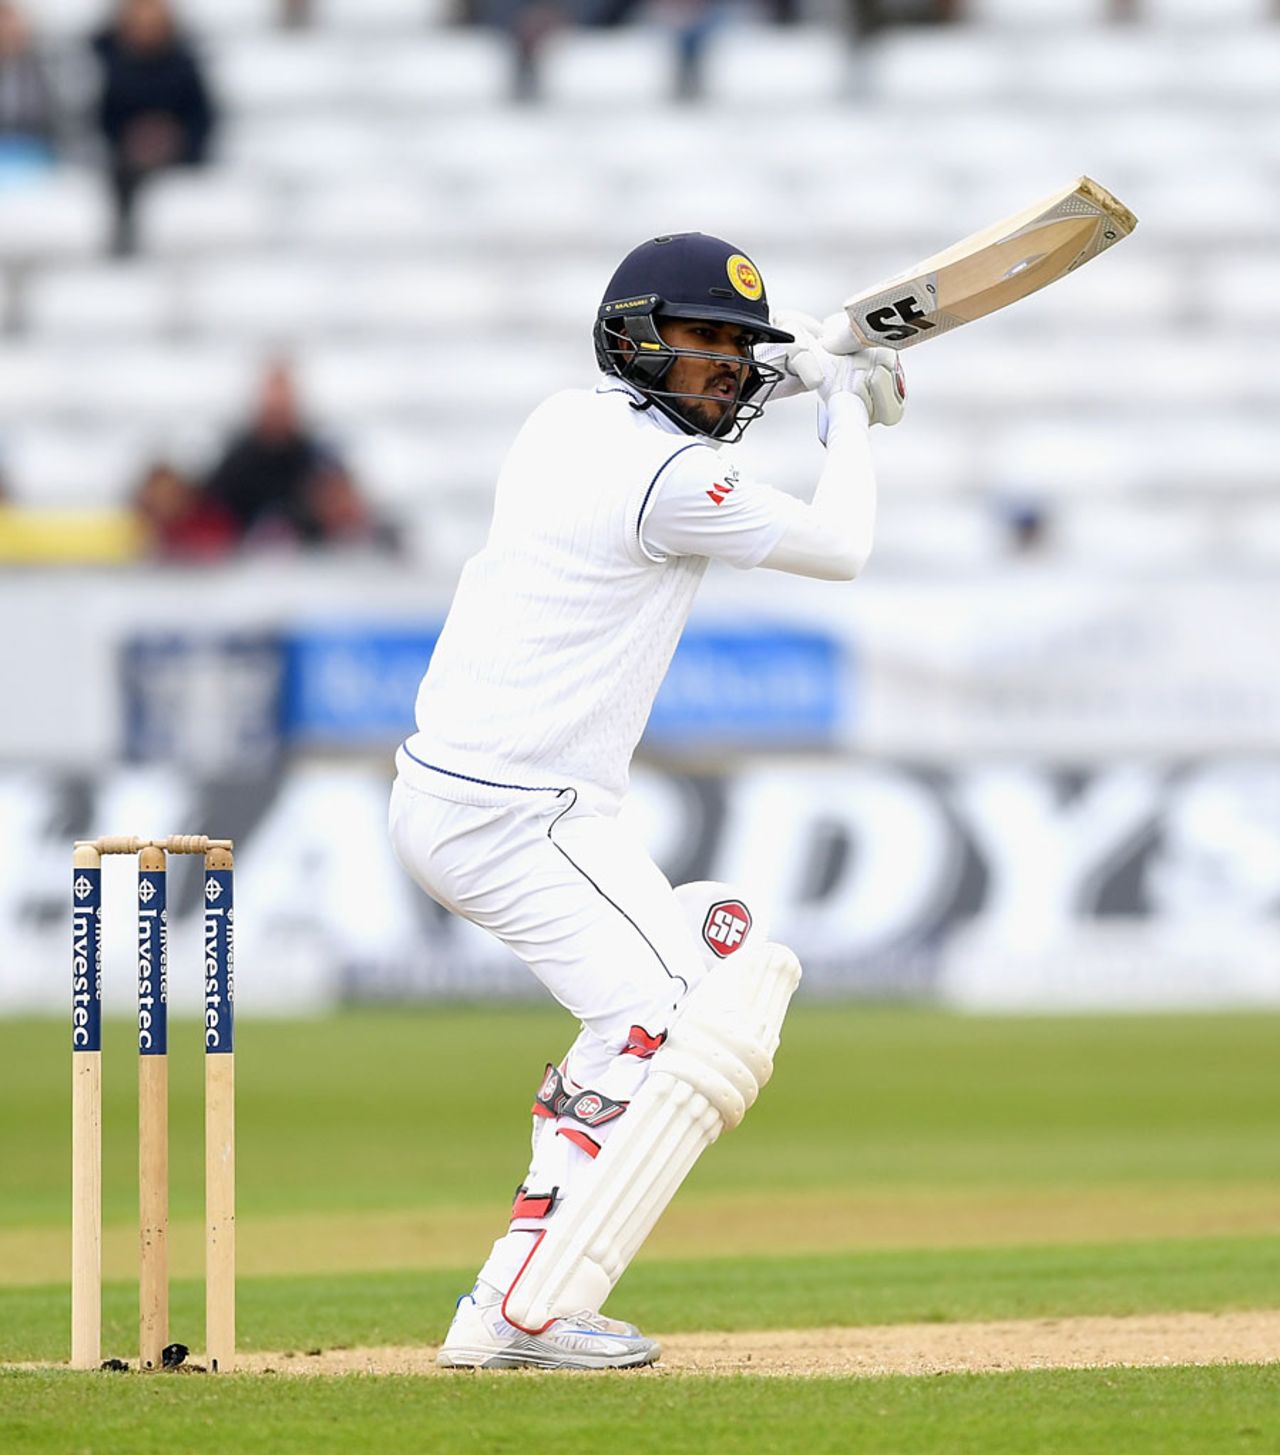 Dinesh Chandimal steers the ball through the off side, England v Sri Lanka, 2nd Test, Chester-le-Street, 4th day, May 30, 2016